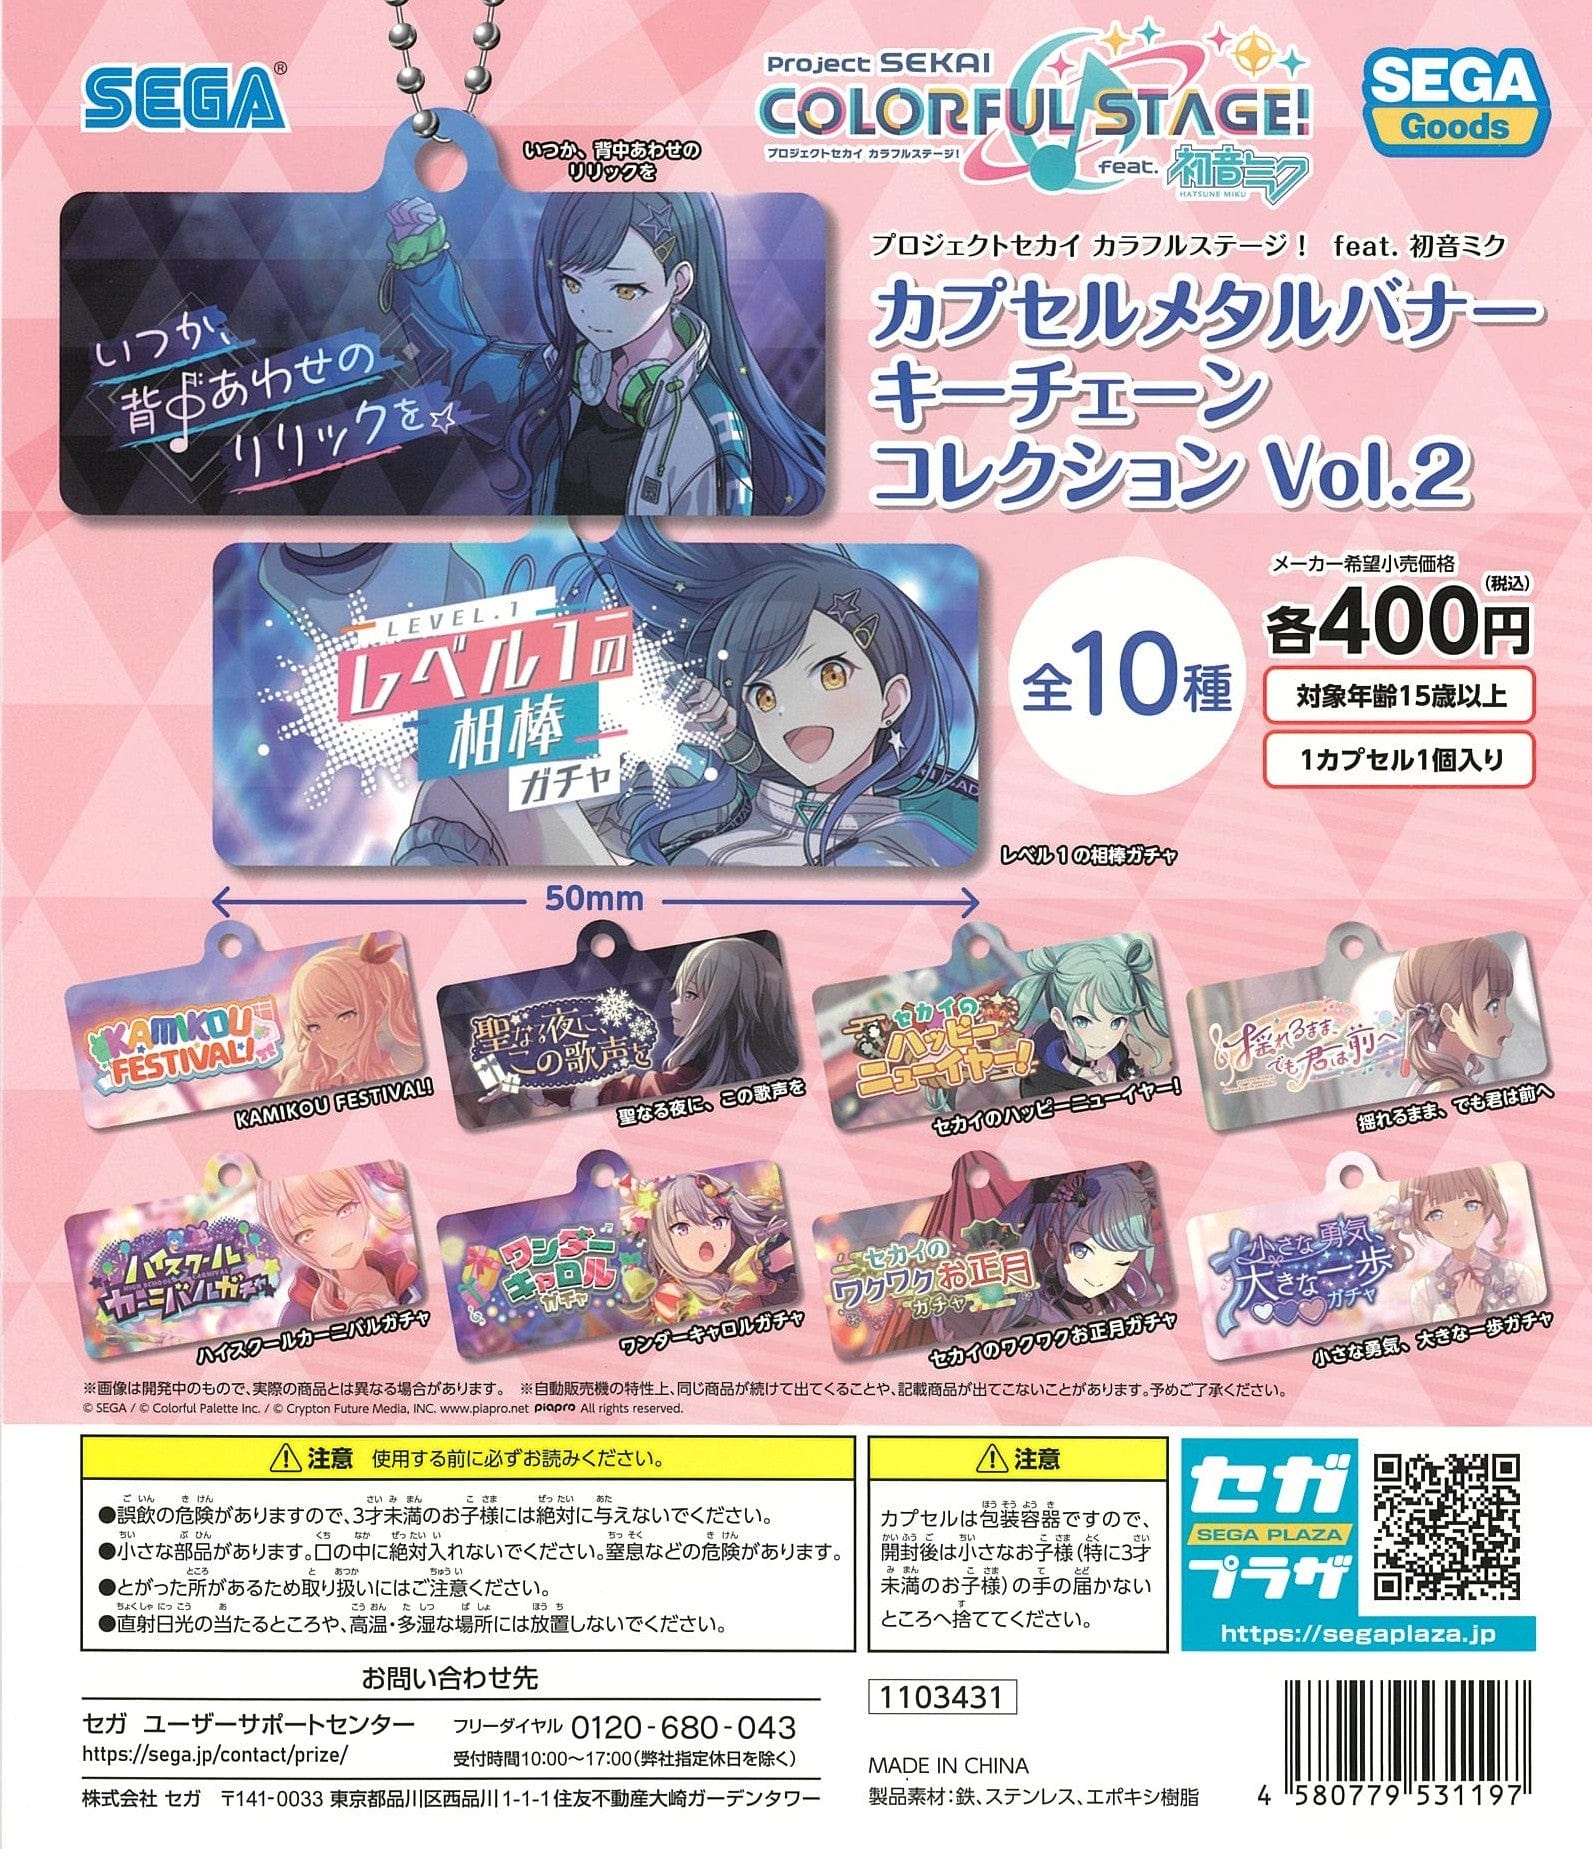 SEGA CP2375 Project SEKAI Colorful Stage ! feat. Hatsune Miku Capsule Metal Banner Key Chain Collection Vol 2